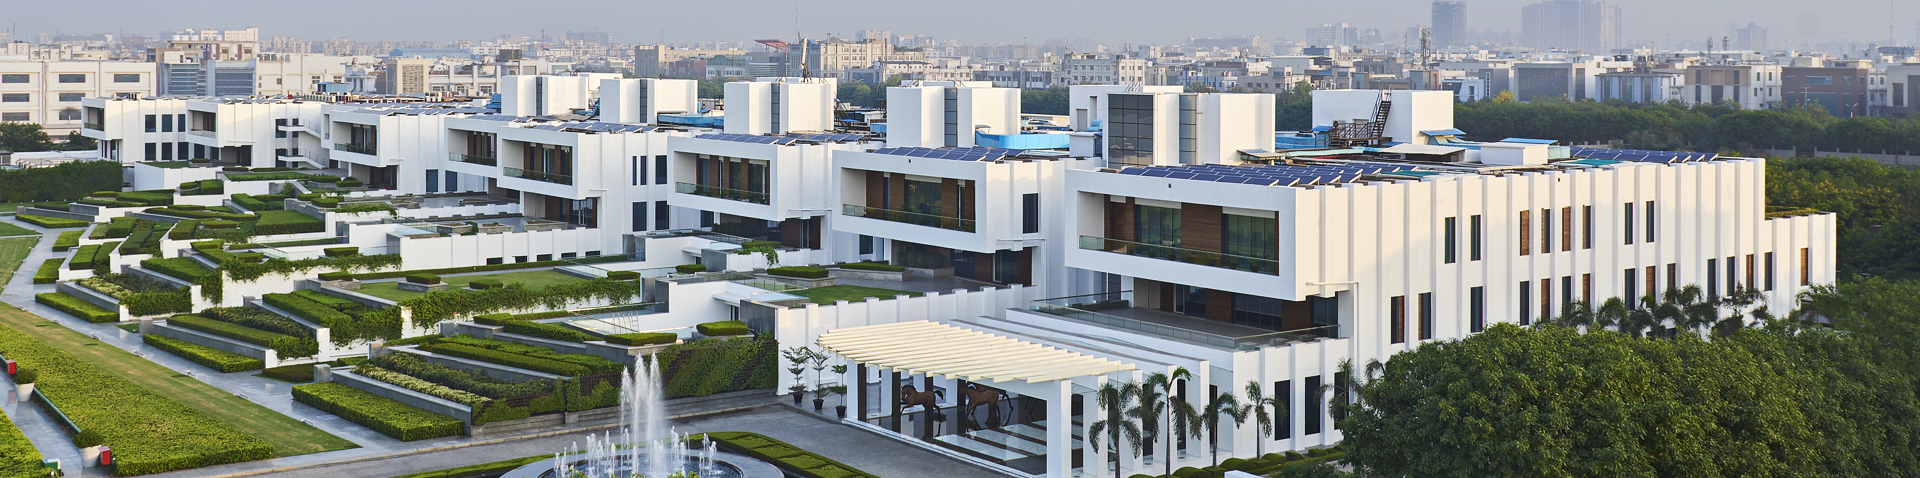 The Dharampal Satyapal Group executes large retrofit project with NOVENCO® ZerAx® fans